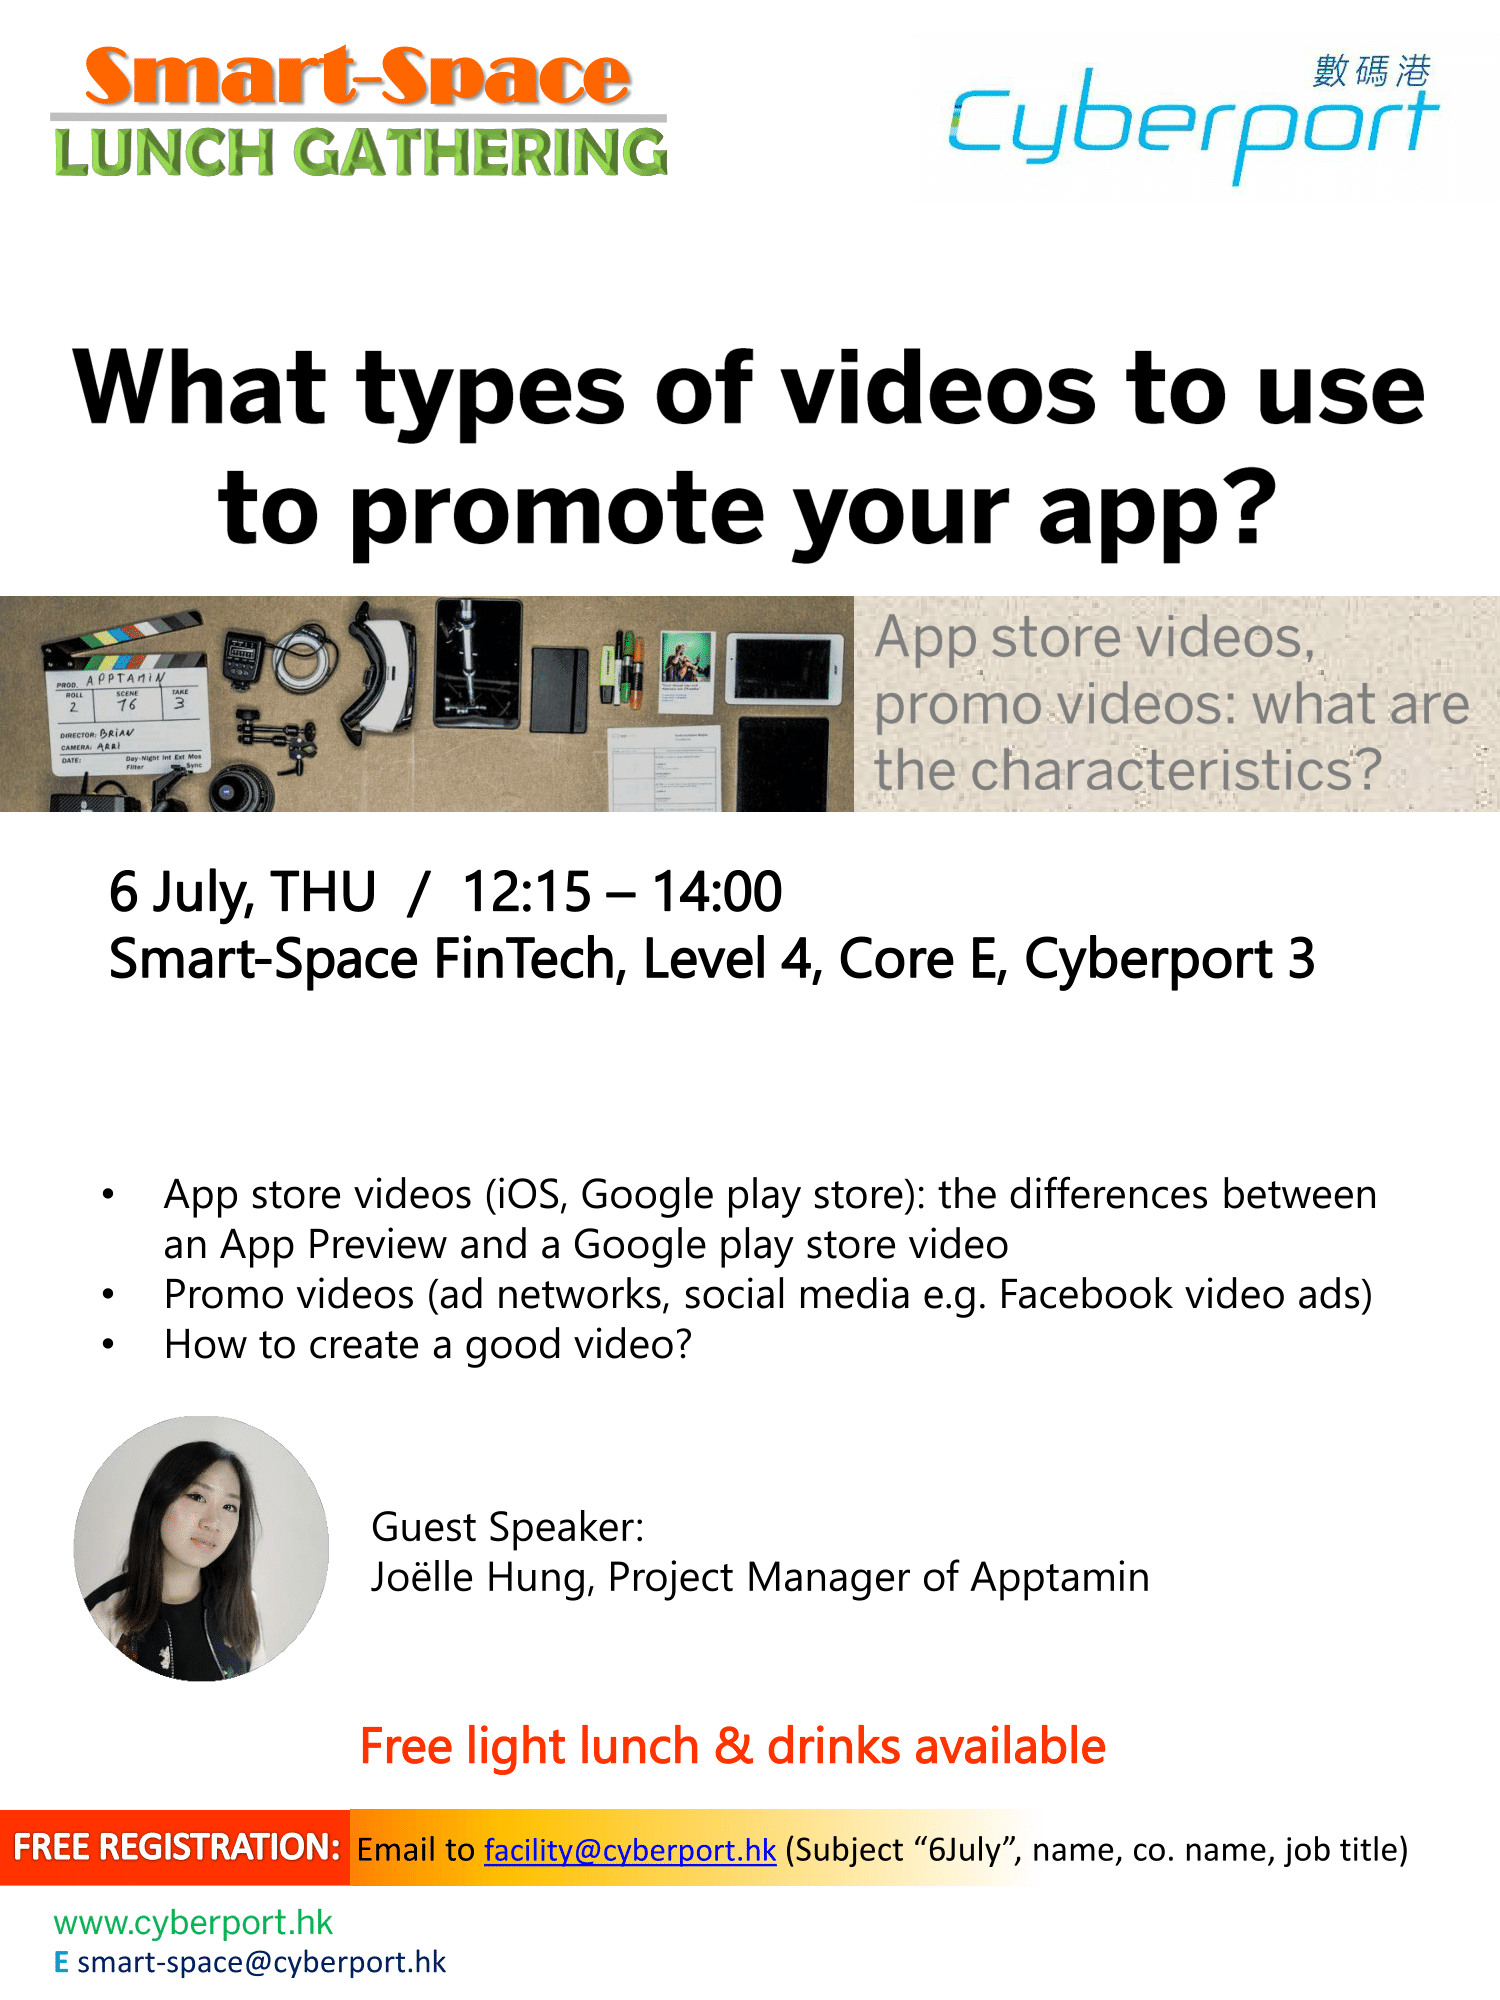 Smart-Space Lunch Gathering: What types of videos to use to promote your app? 